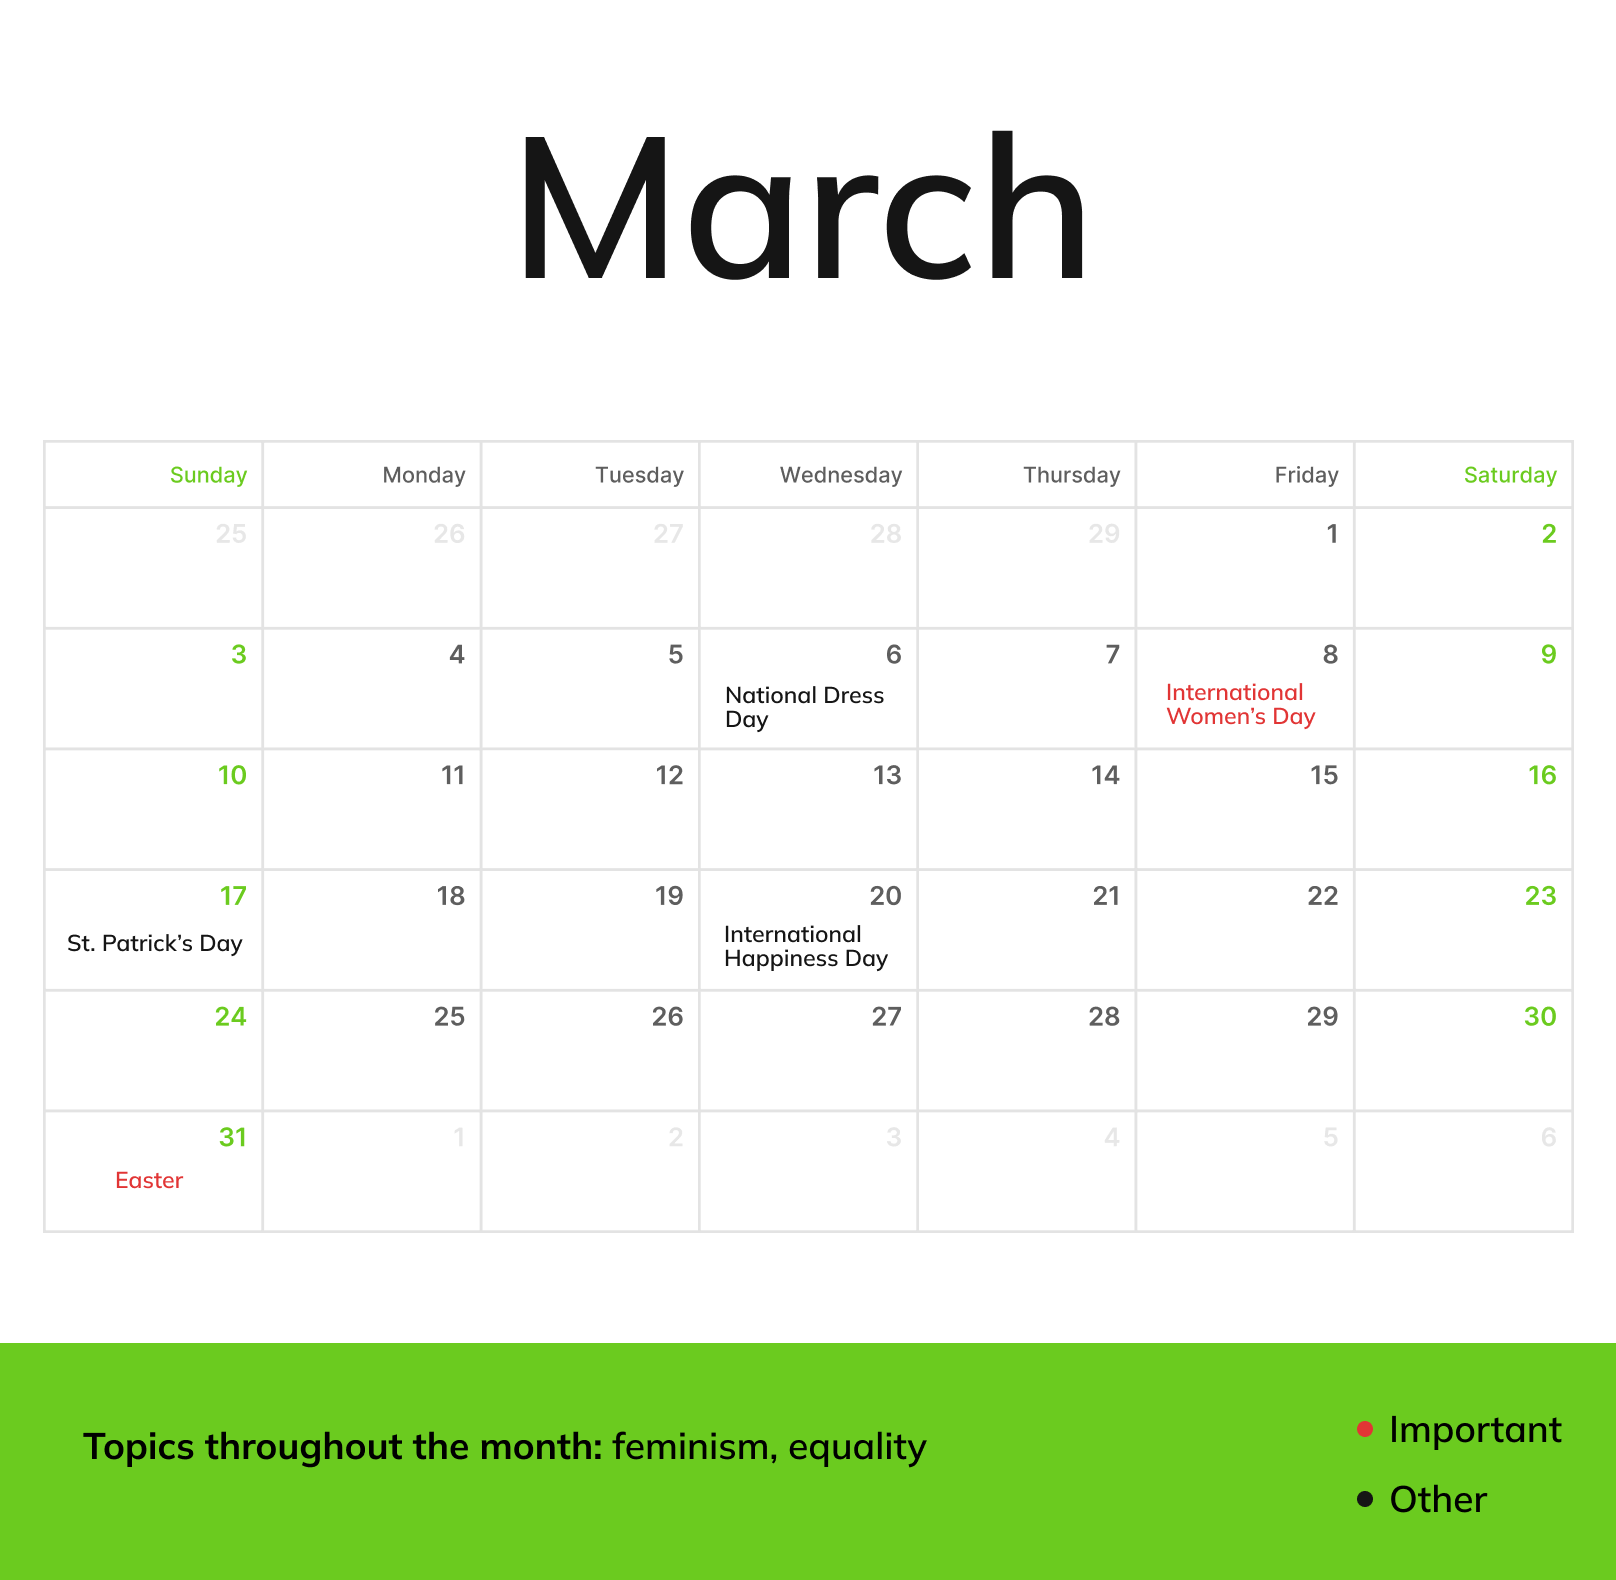 A March monthly calendar with holidays and topics throughout the month being feminism, equality